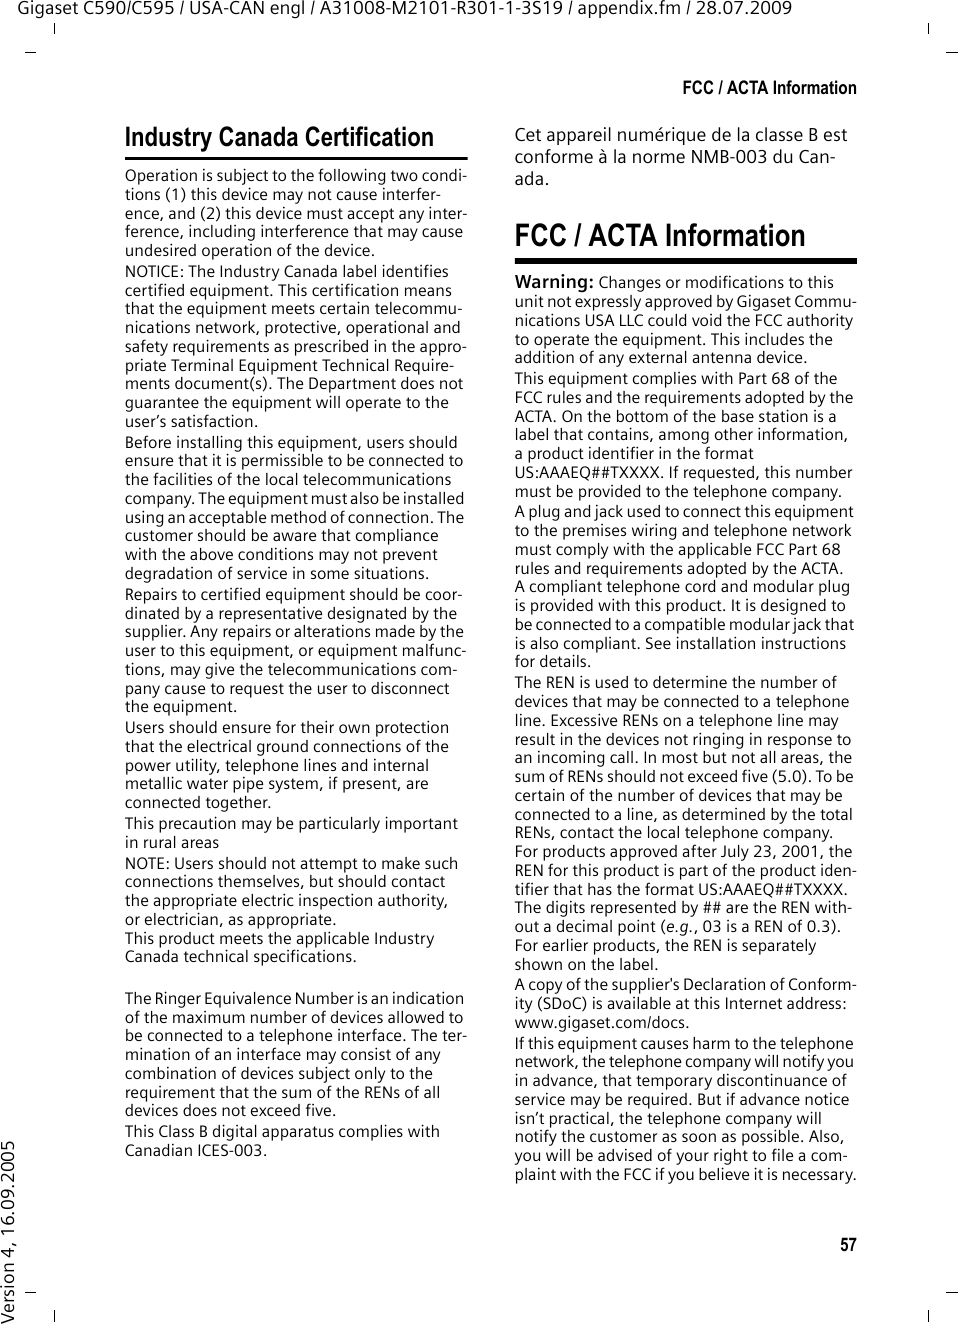 57FCC / ACTA InformationGigaset C590/C595 / USA-CAN engl / A31008-M2101-R301-1-3S19 / appendix.fm / 28.07.2009Version 4, 16.09.2005Industry Canada CertificationOperation is subject to the following two condi-tions (1) this device may not cause interfer-ence, and (2) this device must accept any inter-ference, including interference that may cause undesired operation of the device.NOTICE: The Industry Canada label identifies certified equipment. This certification means that the equipment meets certain telecommu-nications network, protective, operational and safety requirements as prescribed in the appro-priate Terminal Equipment Technical Require-ments document(s). The Department does not guarantee the equipment will operate to the user’s satisfaction.Before installing this equipment, users should ensure that it is permissible to be connected to the facilities of the local telecommunications company. The equipment must also be installed using an acceptable method of connection. The customer should be aware that compliance with the above conditions may not prevent degradation of service in some situations.Repairs to certified equipment should be coor-dinated by a representative designated by the supplier. Any repairs or alterations made by the user to this equipment, or equipment malfunc-tions, may give the telecommunications com-pany cause to request the user to disconnect the equipment.Users should ensure for their own protection that the electrical ground connections of the power utility, telephone lines and internal metallic water pipe system, if present, are connected together.This precaution may be particularly important in rural areasNOTE: Users should not attempt to make such connections themselves, but should contact the appropriate electric inspection authority, or electrician, as appropriate.This product meets the applicable Industry Canada technical specifications.The Ringer Equivalence Number is an indication of the maximum number of devices allowed to be connected to a telephone interface. The ter-mination of an interface may consist of any combination of devices subject only to the requirement that the sum of the RENs of all devices does not exceed five.This Class B digital apparatus complies with Canadian ICES-003.Cet appareil numérique de la classe B est conforme à la norme NMB-003 du Can-ada.FCC / ACTA InformationWarning: Changes or modifications to this unit not expressly approved by Gigaset Commu-nications USA LLC could void the FCC authority to operate the equipment. This includes the addition of any external antenna device.This equipment complies with Part 68 of the FCC rules and the requirements adopted by the ACTA. On the bottom of the base station is a label that contains, among other information, a product identifier in the format US:AAAEQ##TXXXX. If requested, this number must be provided to the telephone company.A plug and jack used to connect this equipment to the premises wiring and telephone network must comply with the applicable FCC Part 68 rules and requirements adopted by the ACTA. A compliant telephone cord and modular plug is provided with this product. It is designed to be connected to a compatible modular jack that is also compliant. See installation instructions for details.The REN is used to determine the number of devices that may be connected to a telephone line. Excessive RENs on a telephone line may result in the devices not ringing in response to an incoming call. In most but not all areas, the sum of RENs should not exceed five (5.0). To be certain of the number of devices that may be connected to a line, as determined by the total RENs, contact the local telephone company. For products approved after July 23, 2001, the REN for this product is part of the product iden-tifier that has the format US:AAAEQ##TXXXX. The digits represented by ## are the REN with-out a decimal point (e.g., 03 is a REN of 0.3). For earlier products, the REN is separately shown on the label.A copy of the supplier&apos;s Declaration of Conform-ity (SDoC) is available at this Internet address: www.gigaset.com/docs.If this equipment causes harm to the telephone network, the telephone company will notify you in advance, that temporary discontinuance of service may be required. But if advance notice isn’t practical, the telephone company will notify the customer as soon as possible. Also, you will be advised of your right to file a com-plaint with the FCC if you believe it is necessary.